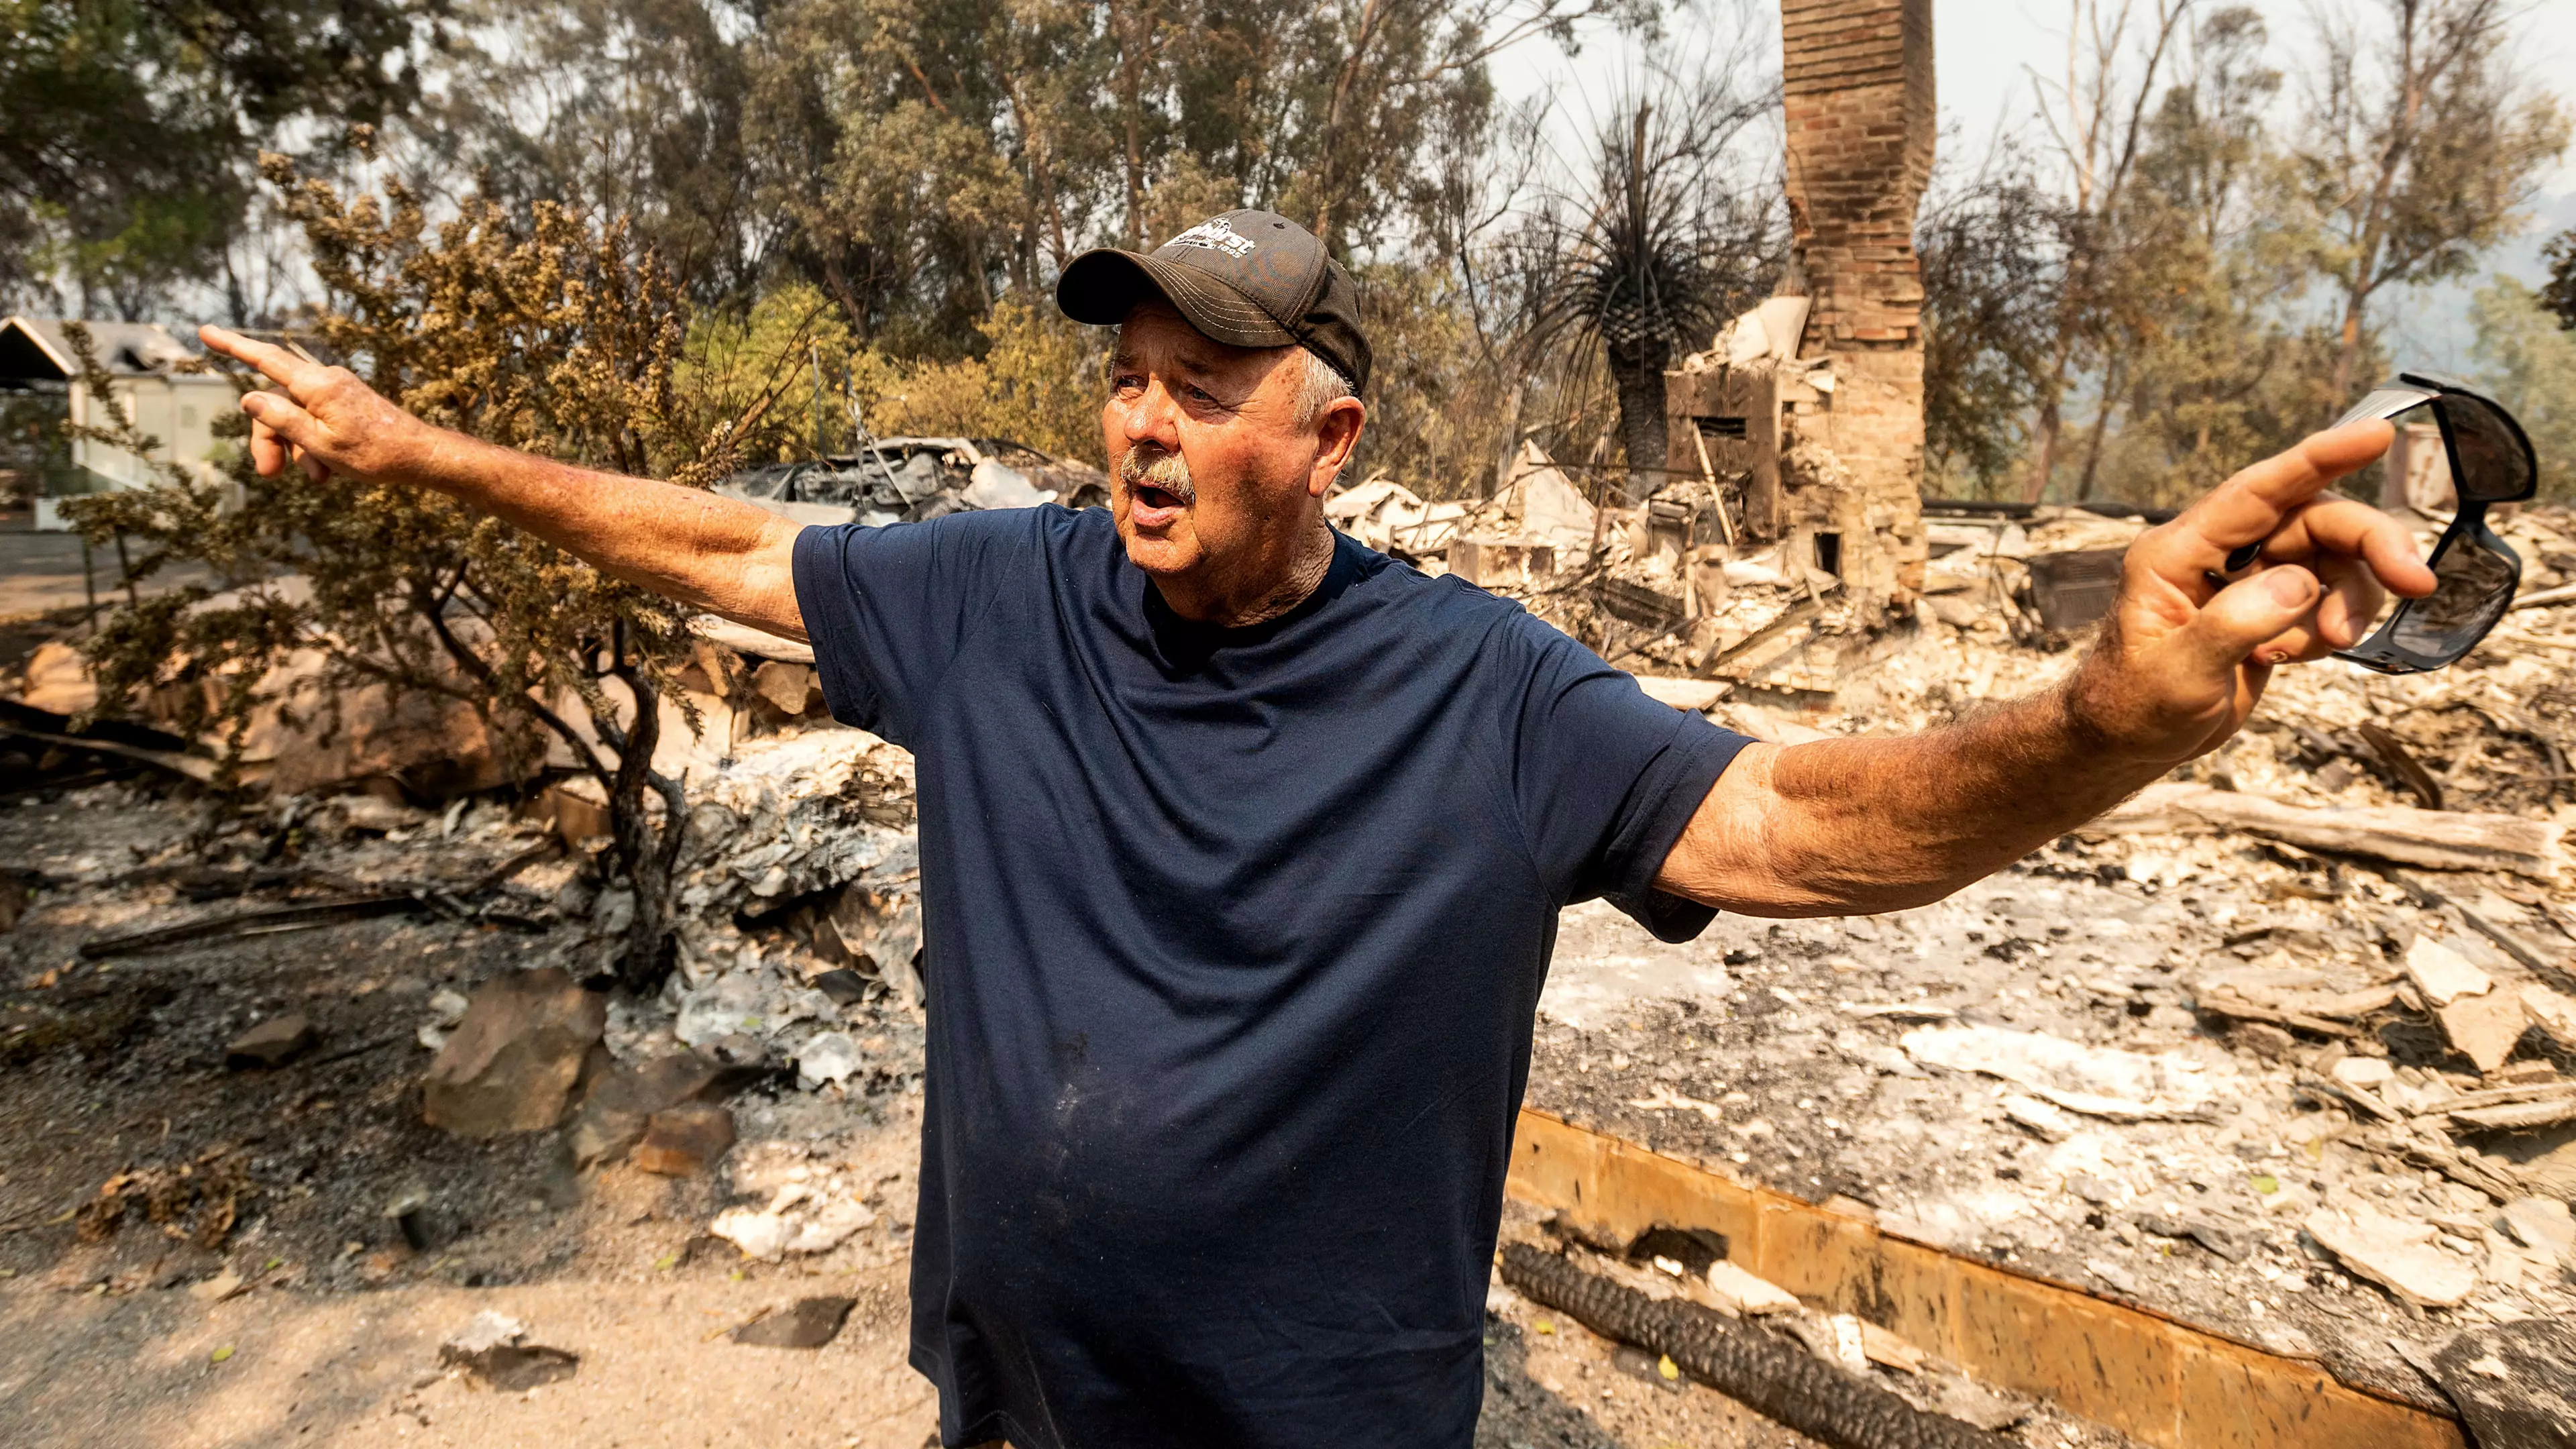 Californian Man Devastated After Dream Home He Spent 30 Years Building Is Destroyed In Wildfire